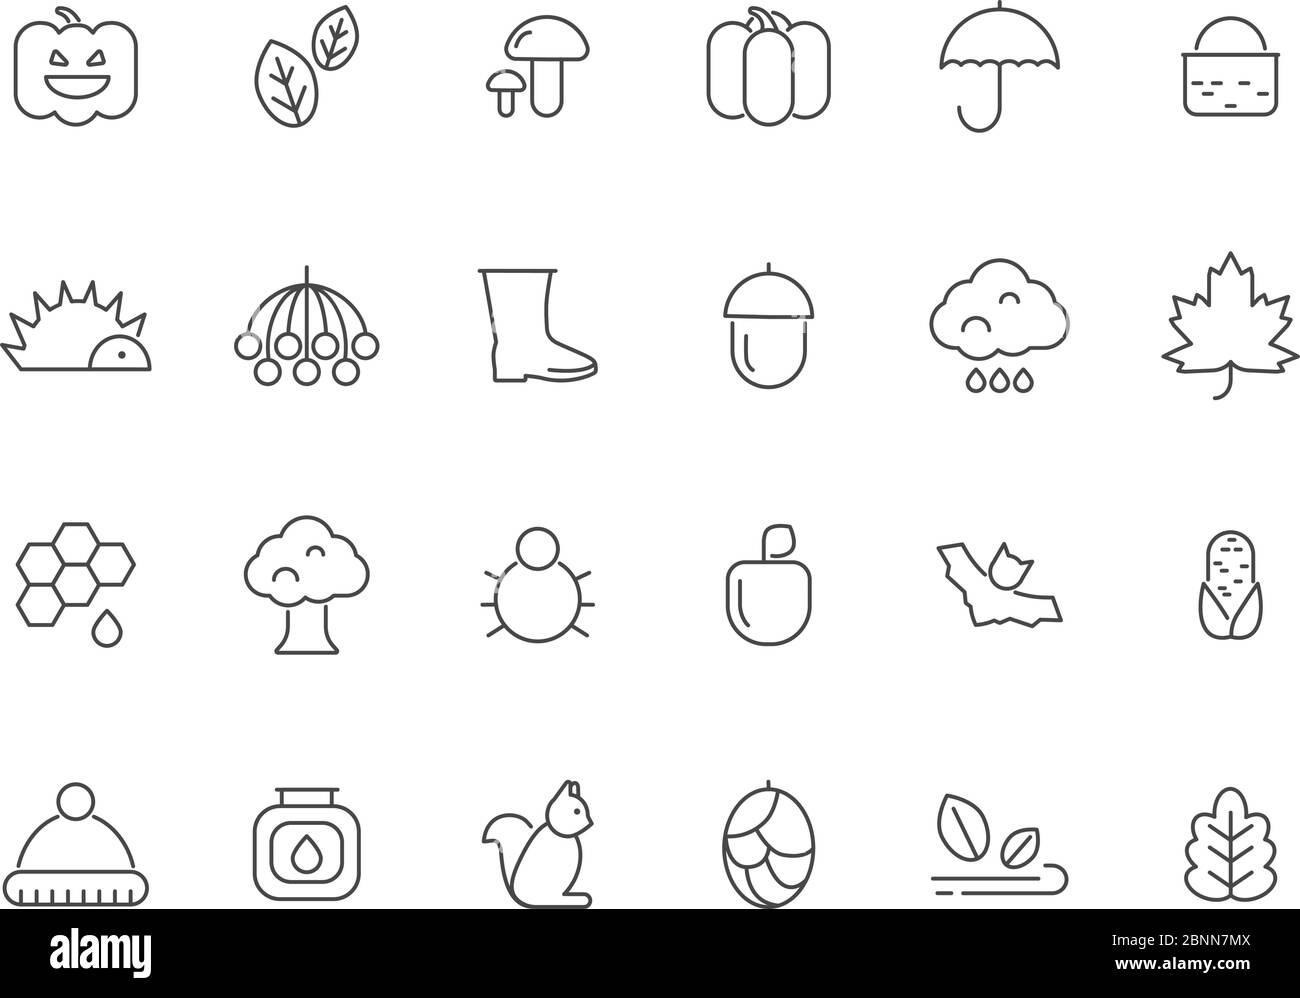 Linear autumn symbols. Vector icons set isolate Stock Vector